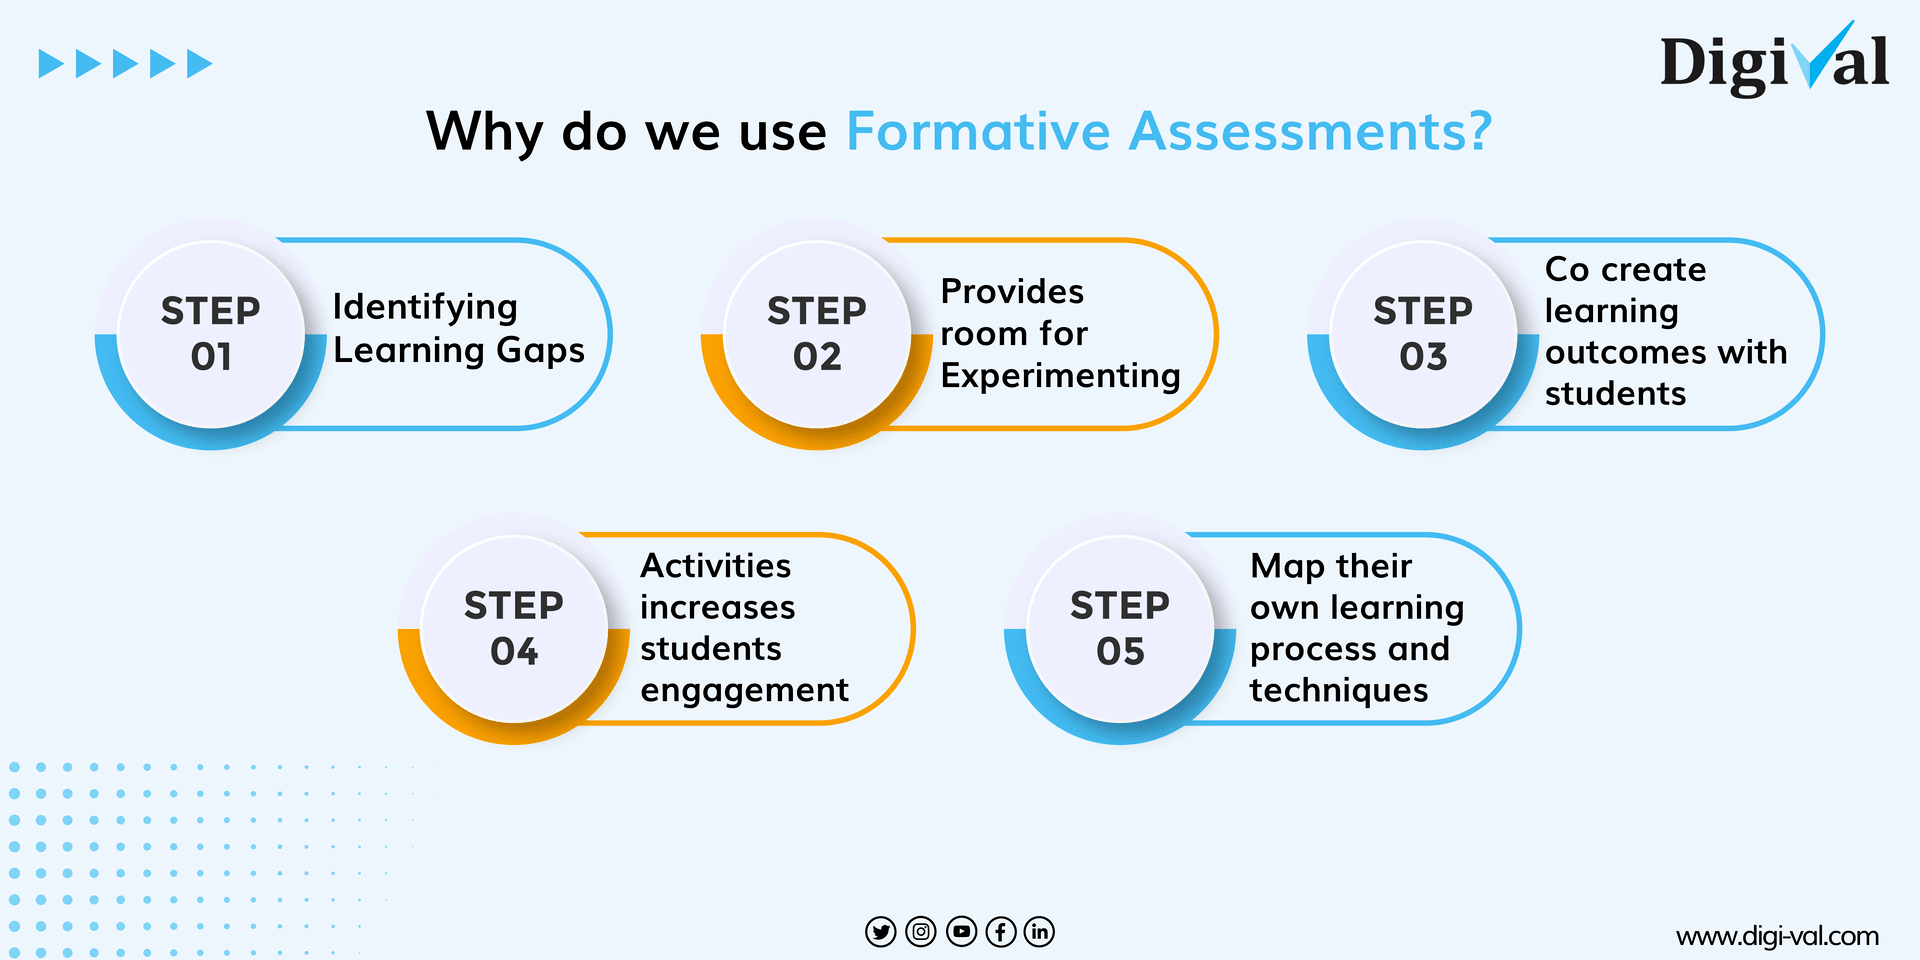 Comprehending the benefits of Formative assessment